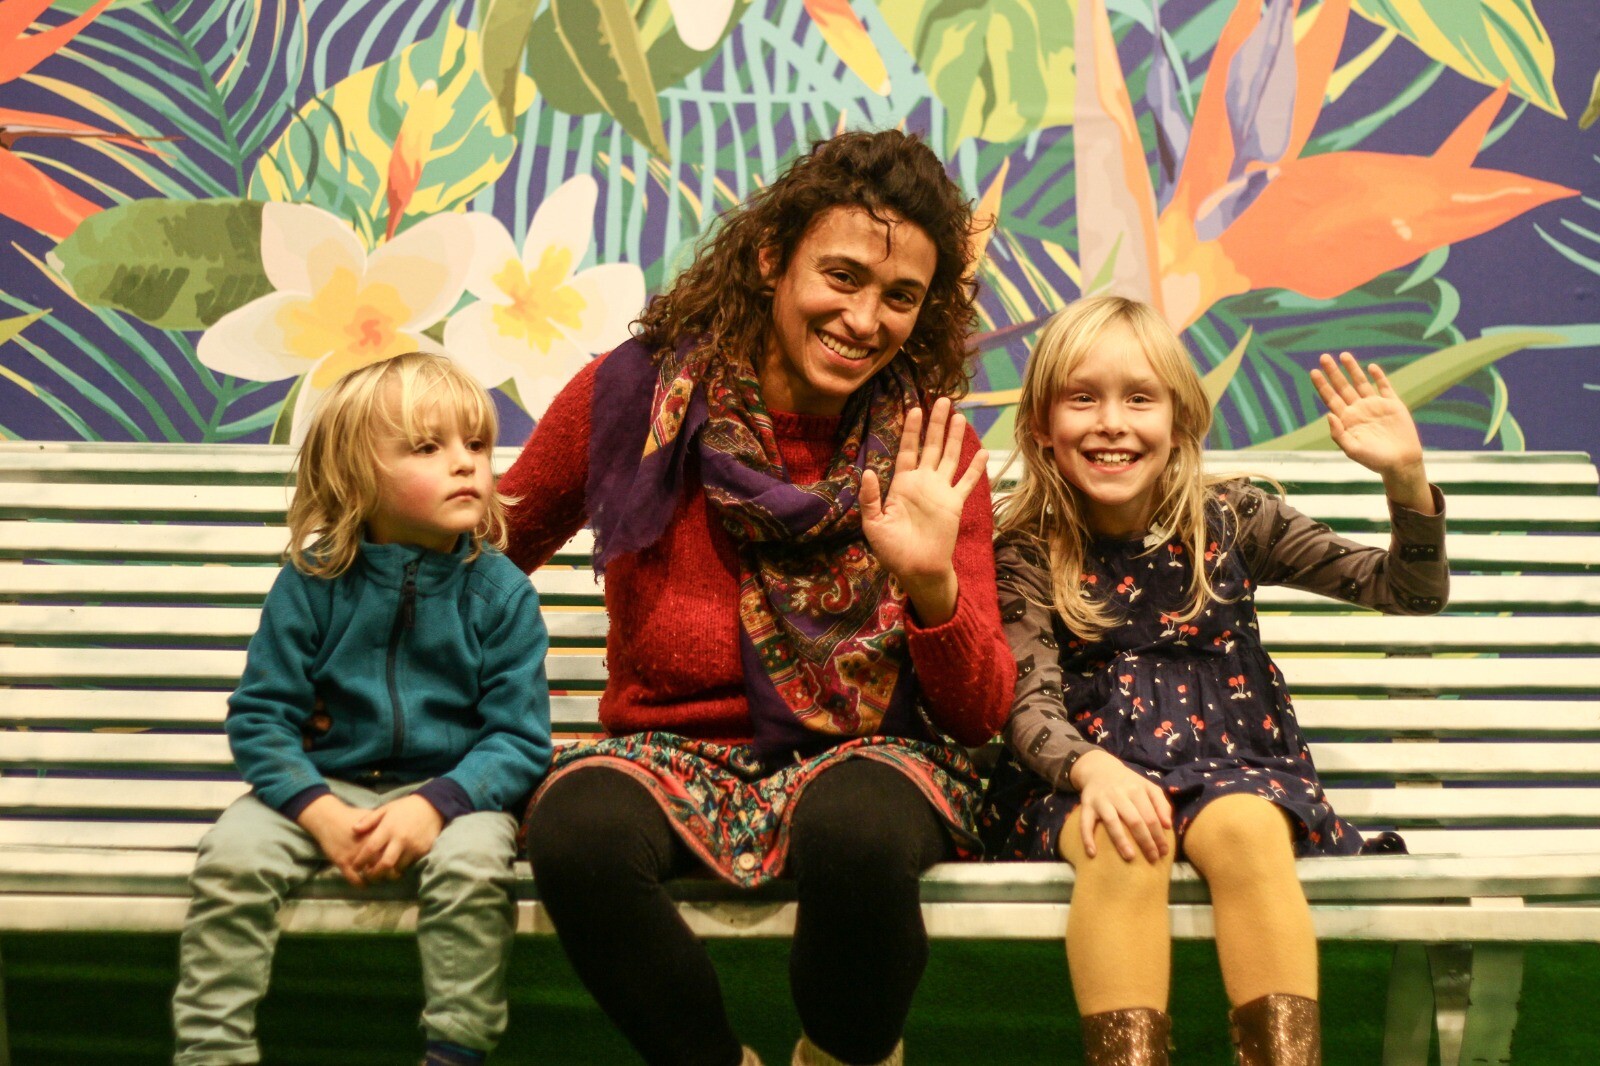 One adult and two kids sitting on a bench and waving at the camera.